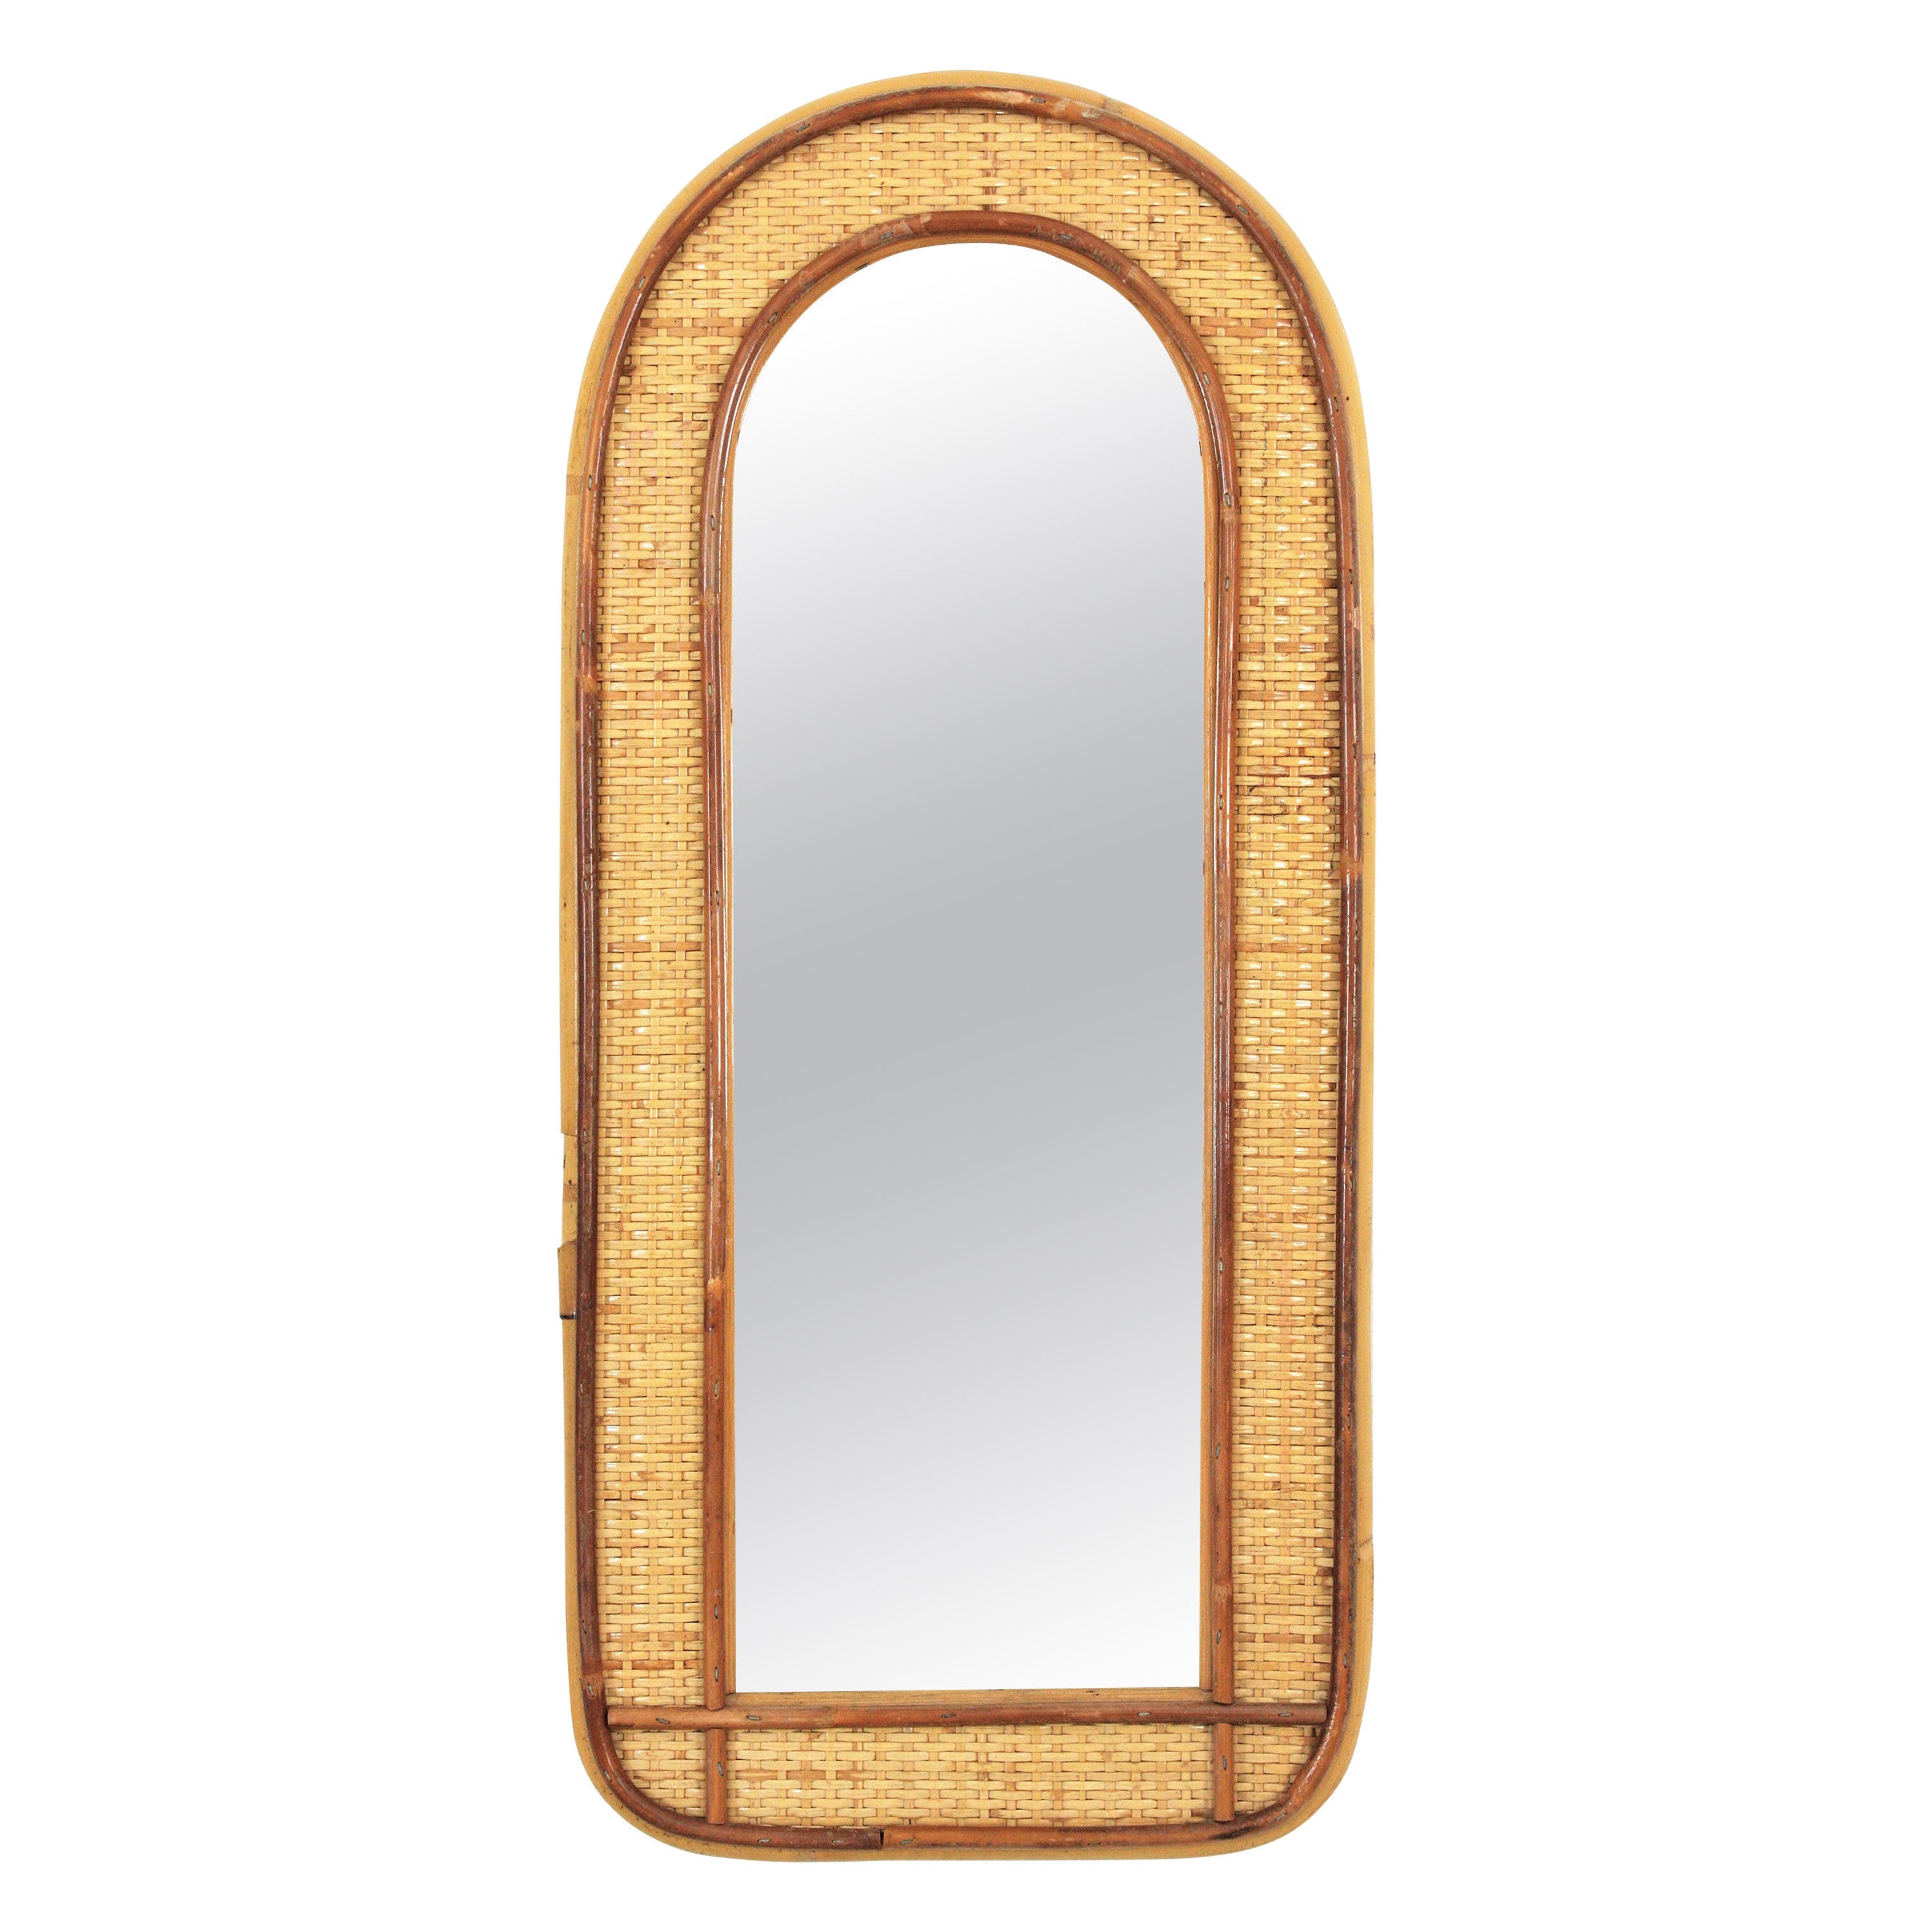 Rattan Woven Wicker Wall Mirror with Arched Top